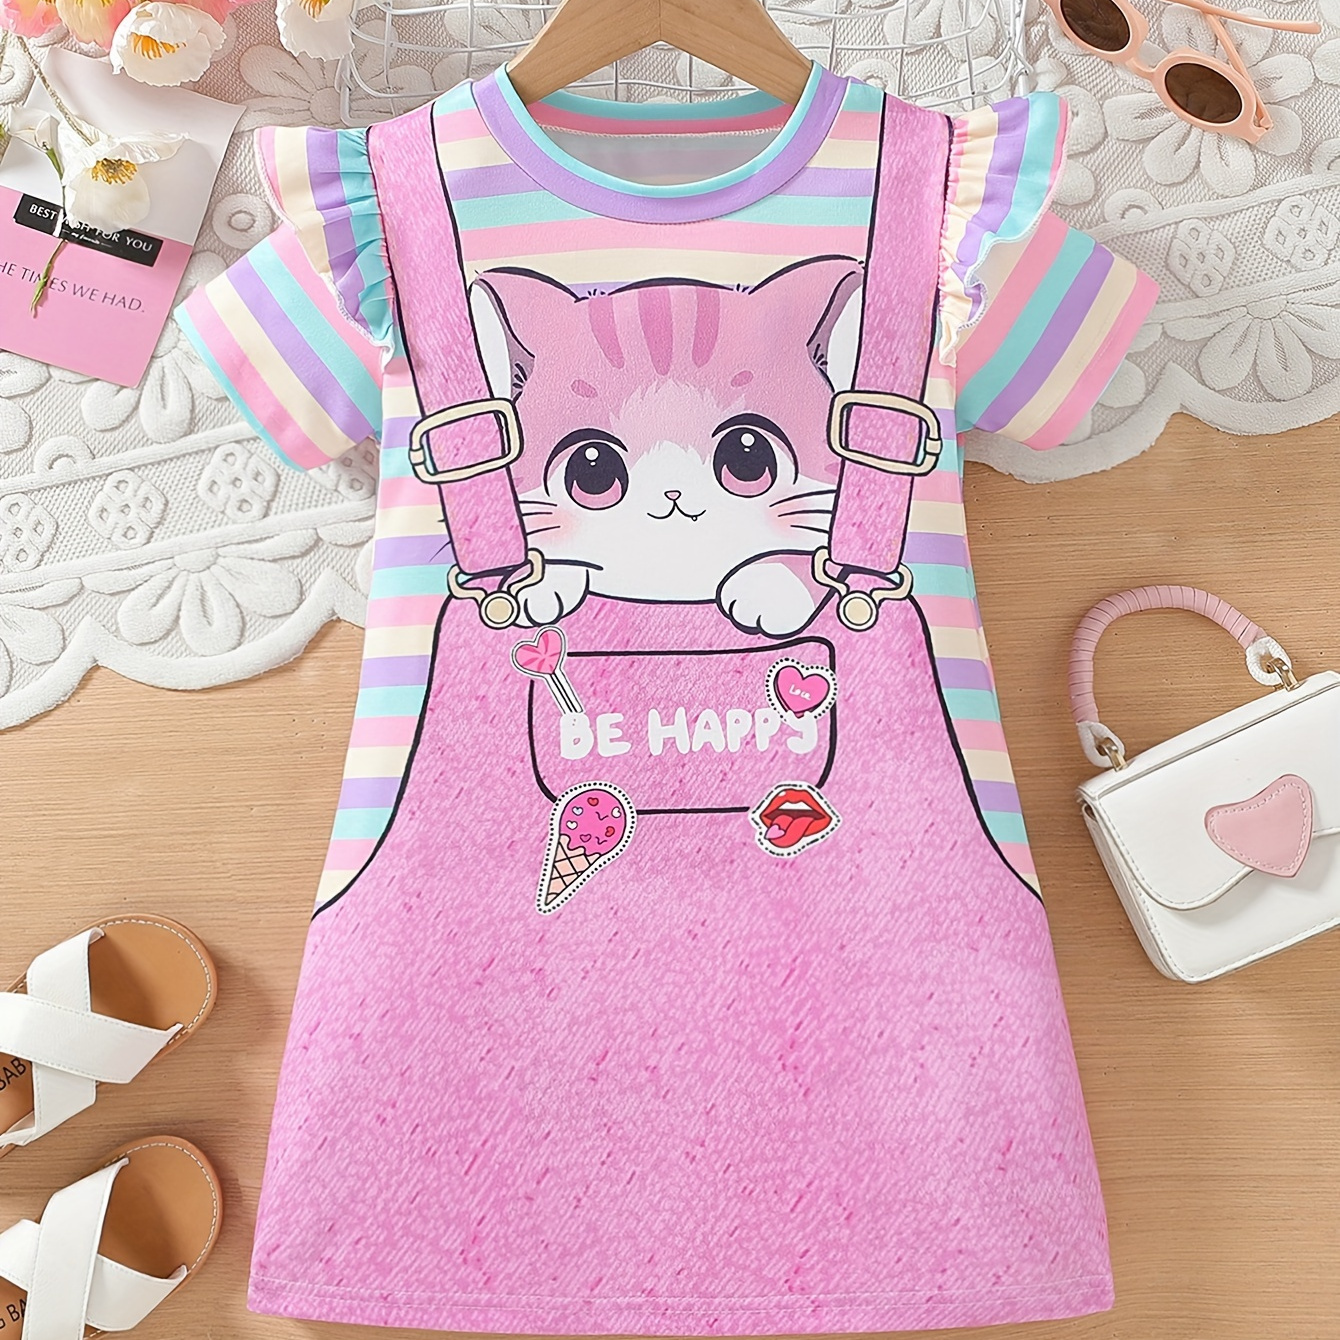 

Adorable Kitty & Stripes 3d Graphic T-shirt Dress For Girls Holiday Casual Dresses, Girls Clothing, Summer Gift